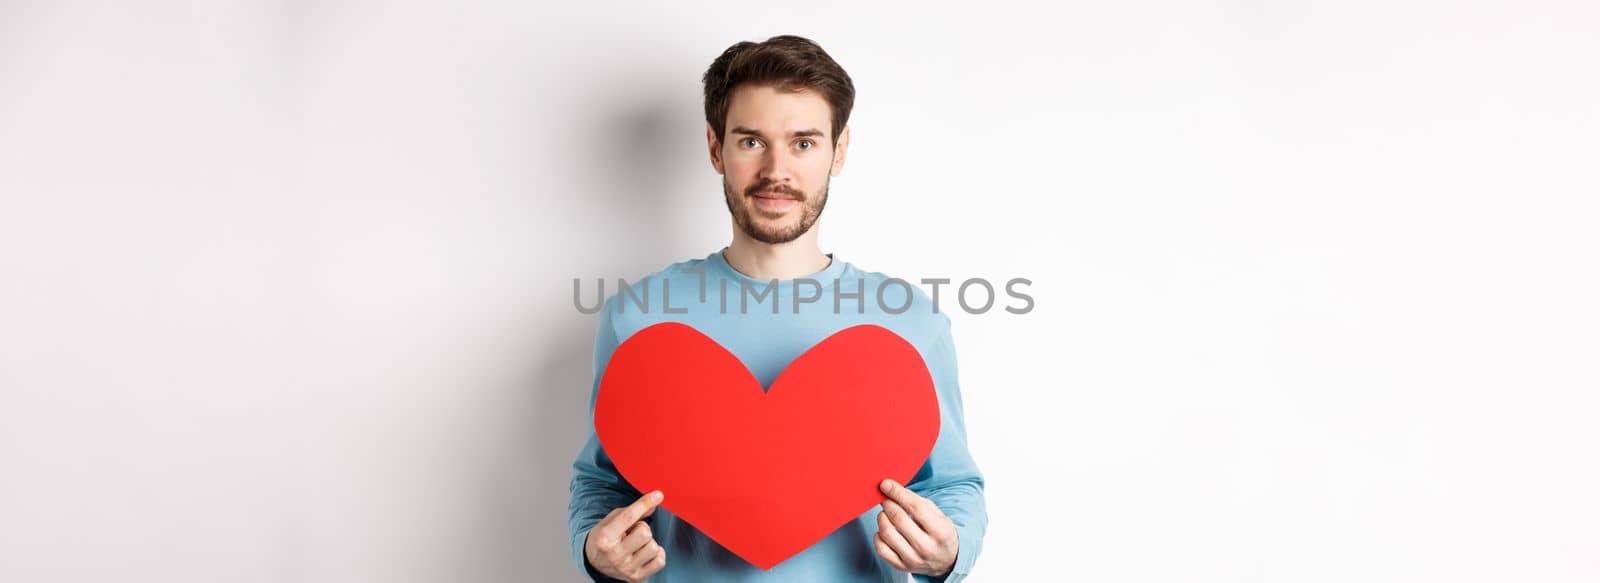 Smiling young man holding valentines heart cutout and looking at camera, waiting for true love girlfriend, standing over white background.